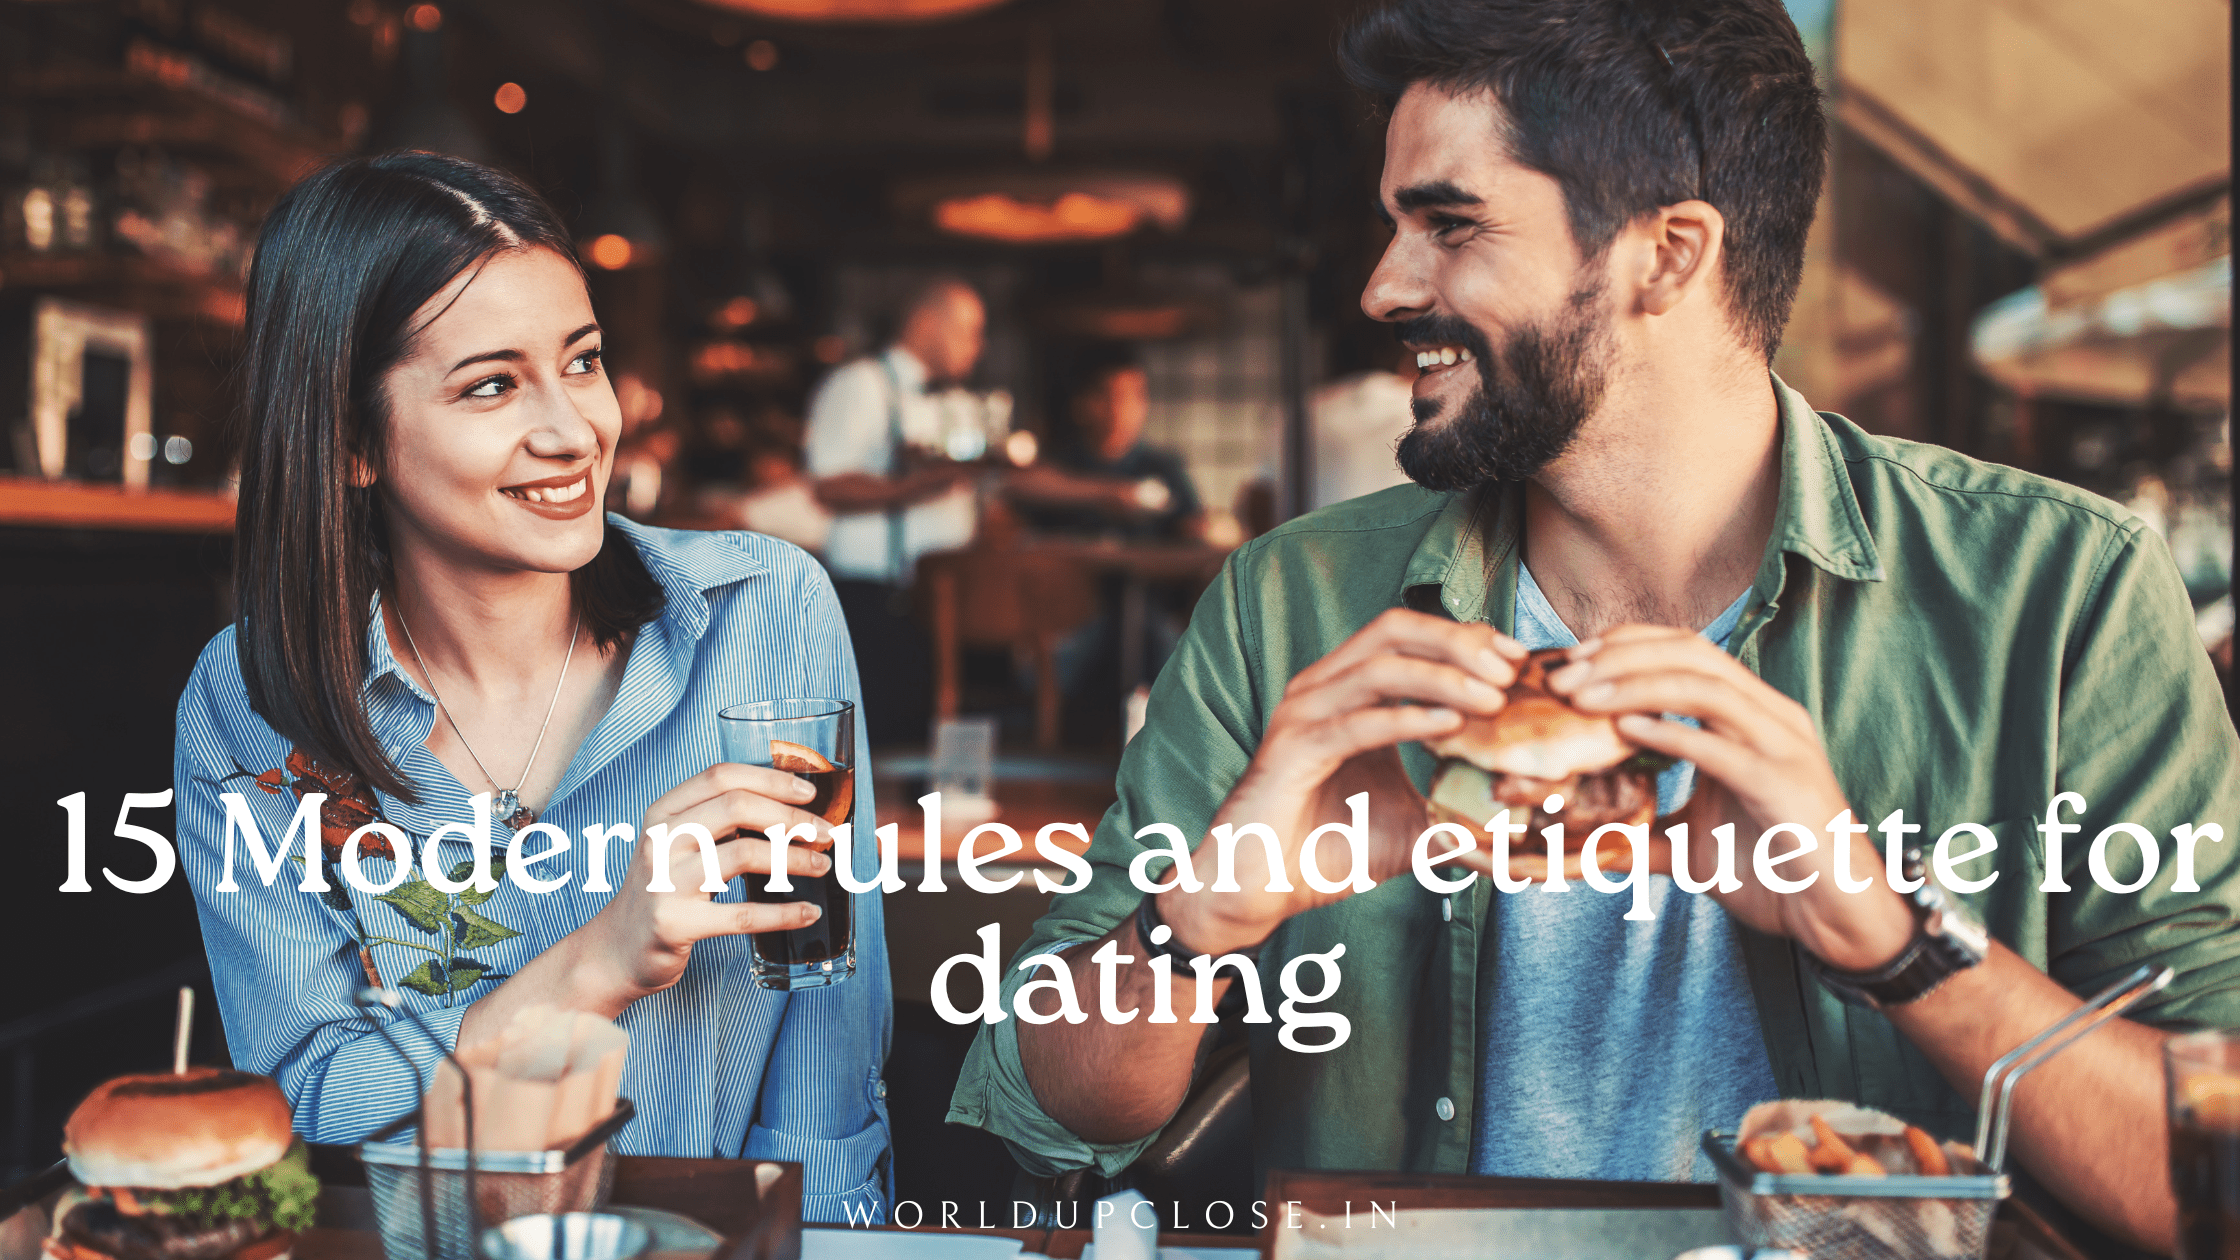 15 Modern rules and etiquette for dating 3